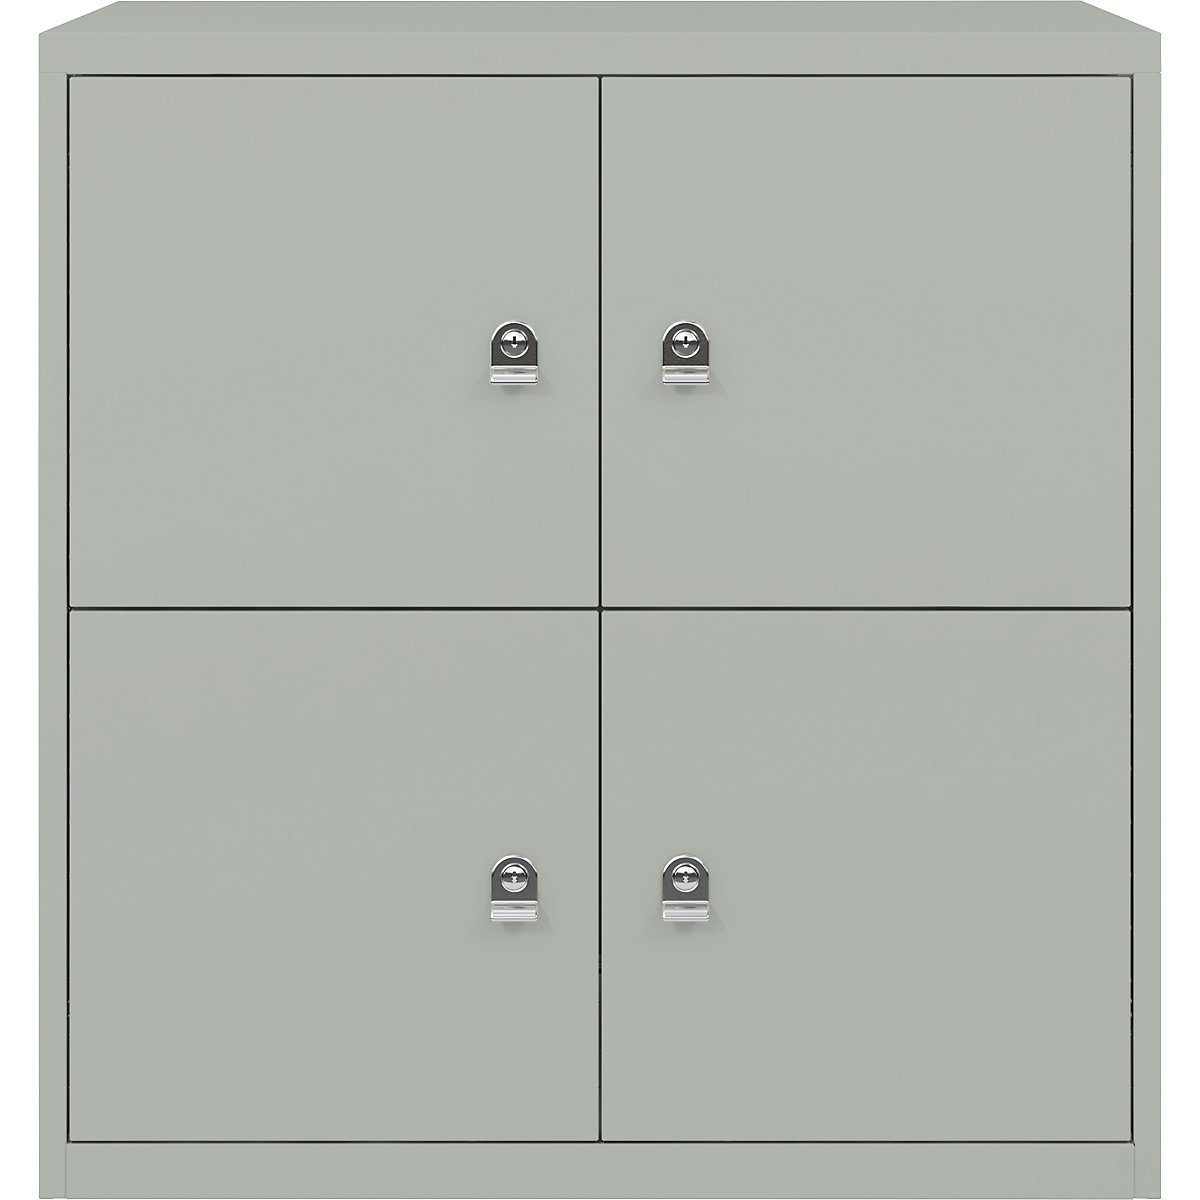 BISLEY – LateralFile™ lodge, with 4 lockable compartments, height 375 mm each, york